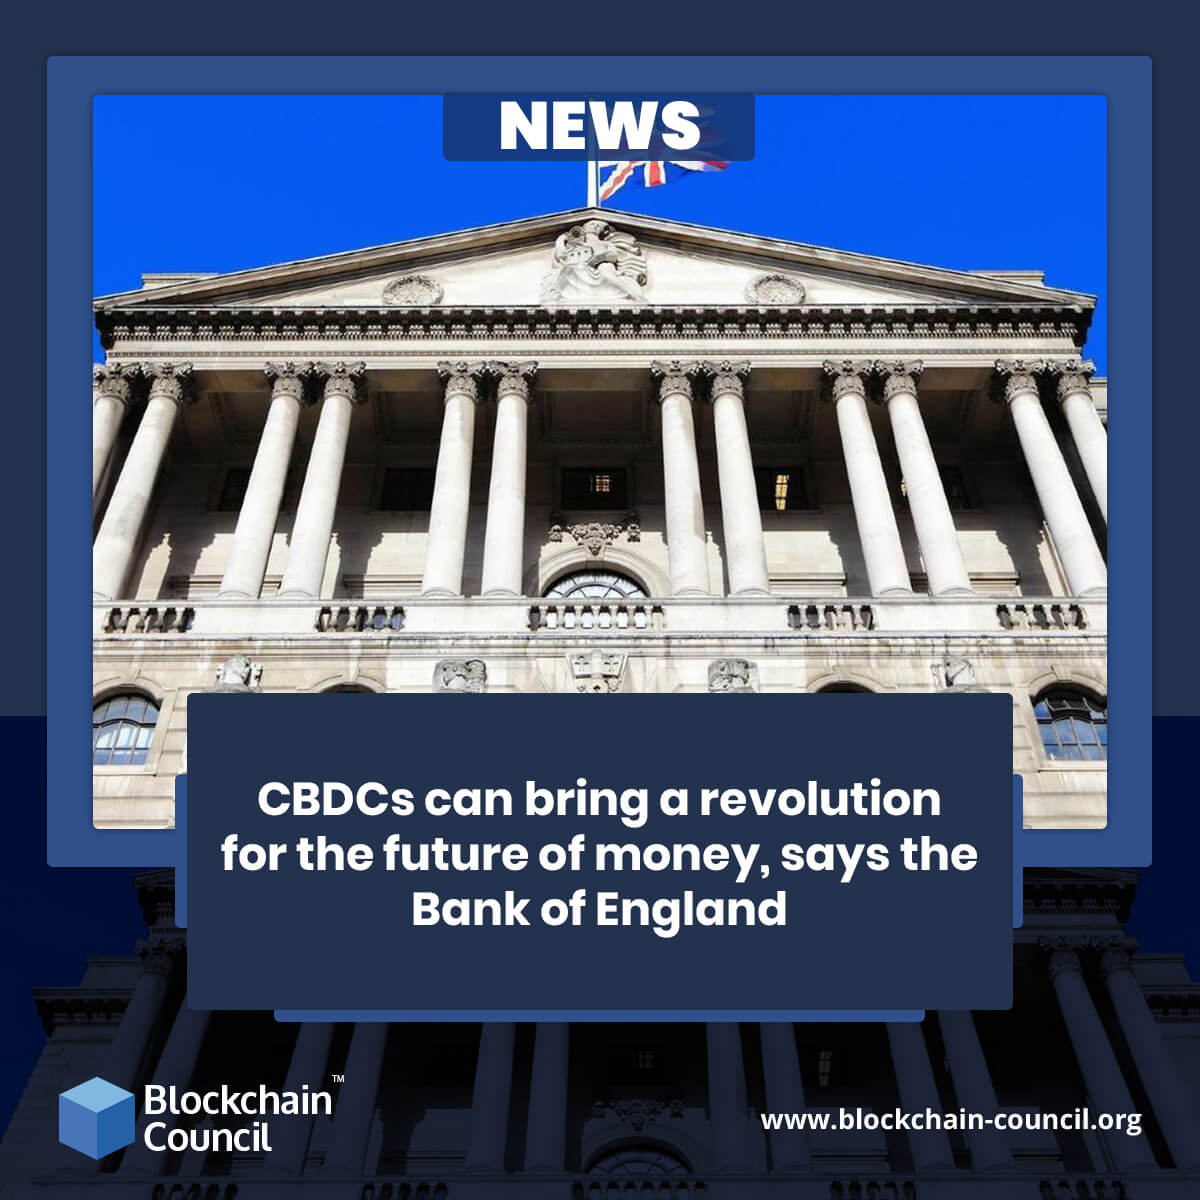 CBDCs can bring a revolution for the future of money, says the Bank of England (1)